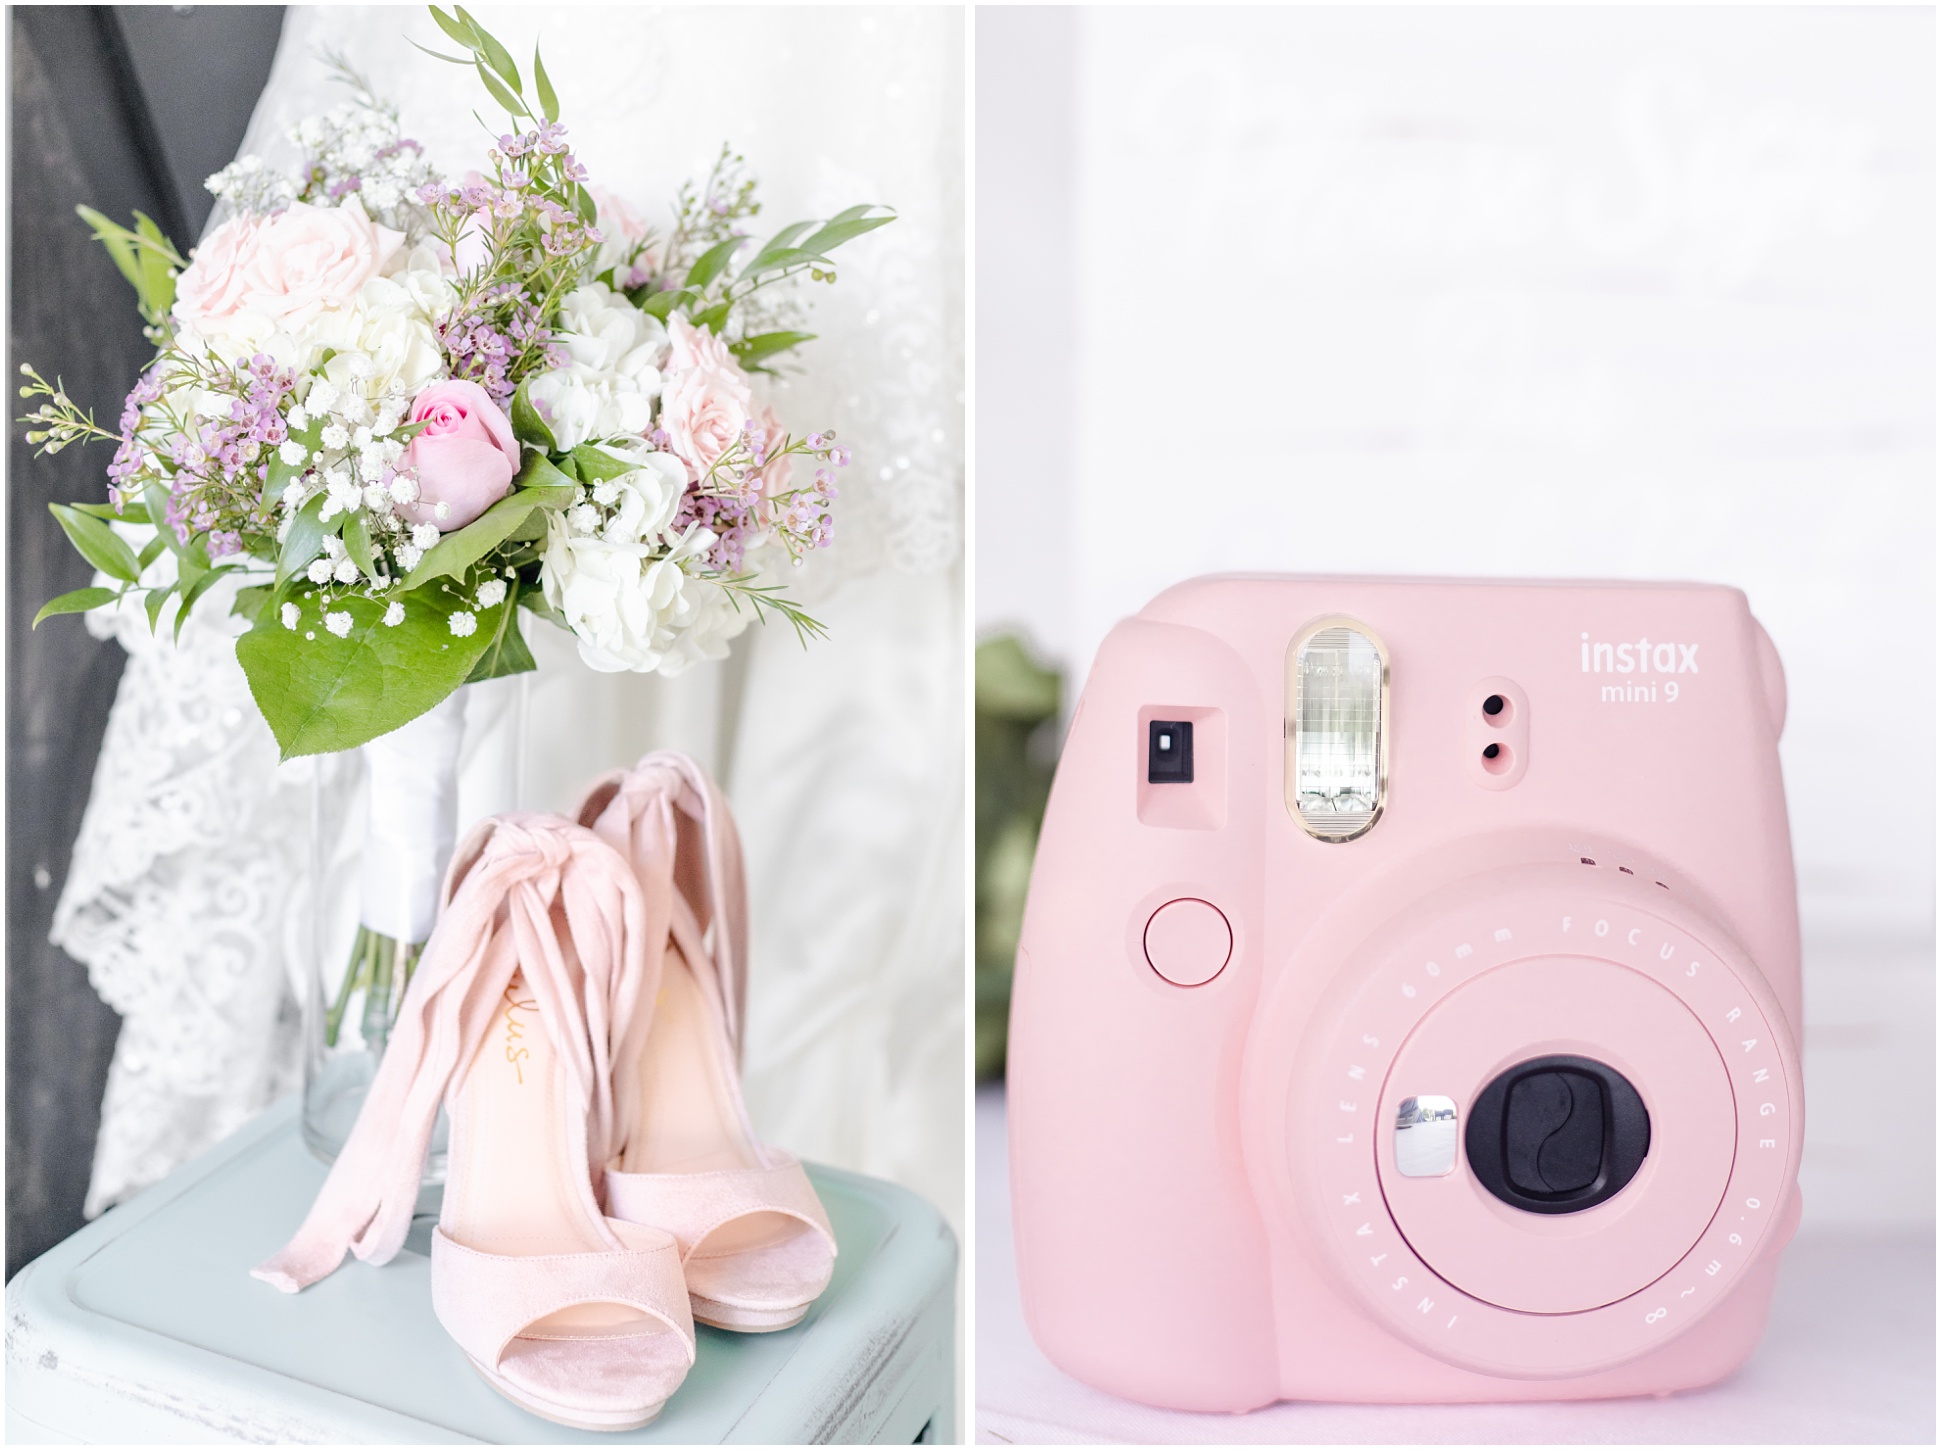 Left: The bridal bouquet and her blush shoes, right: the Instax camera from the reception